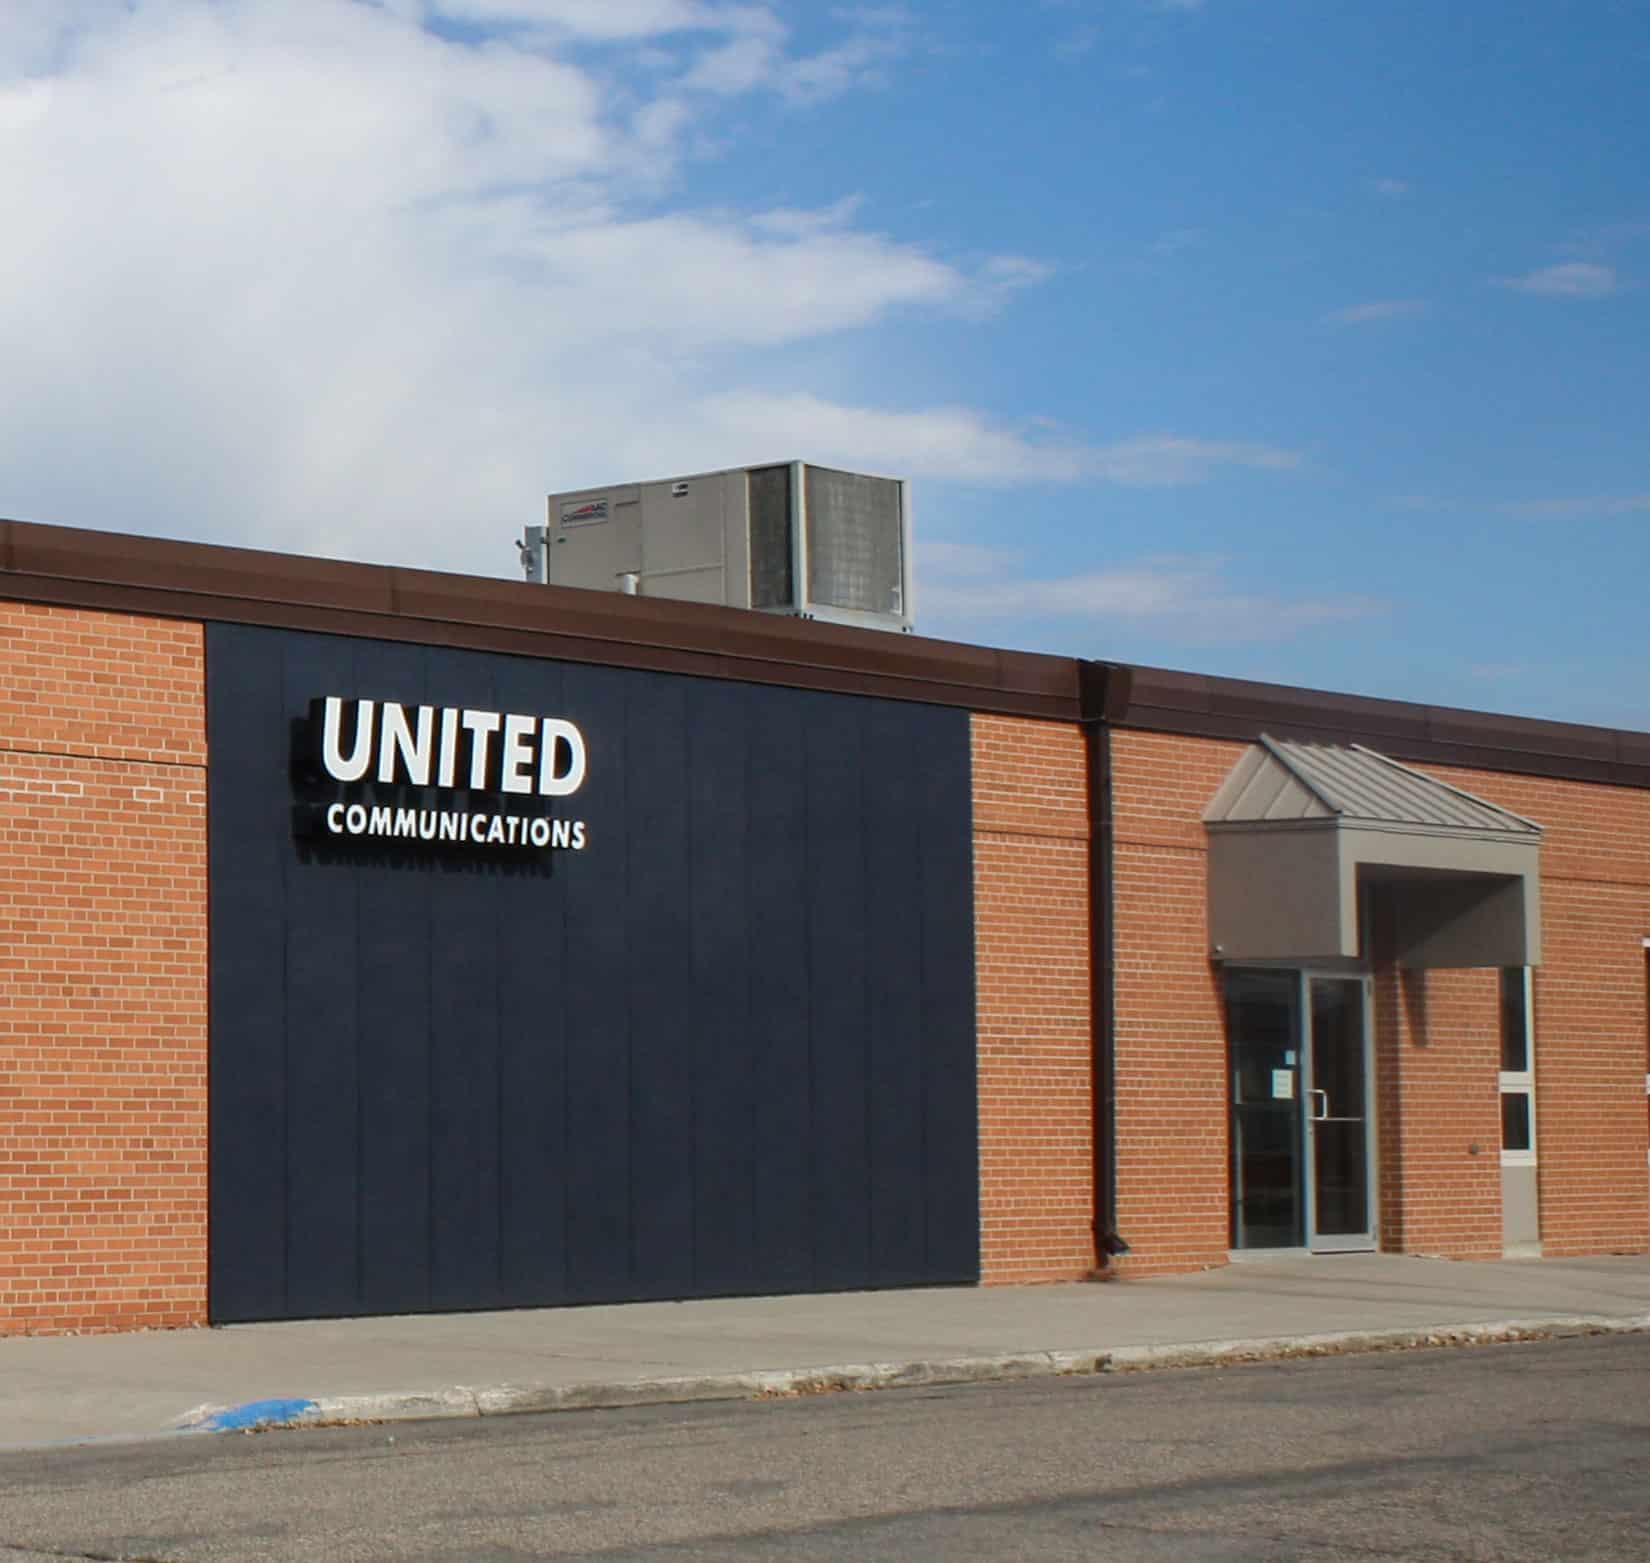 An exterior sign for United Communications